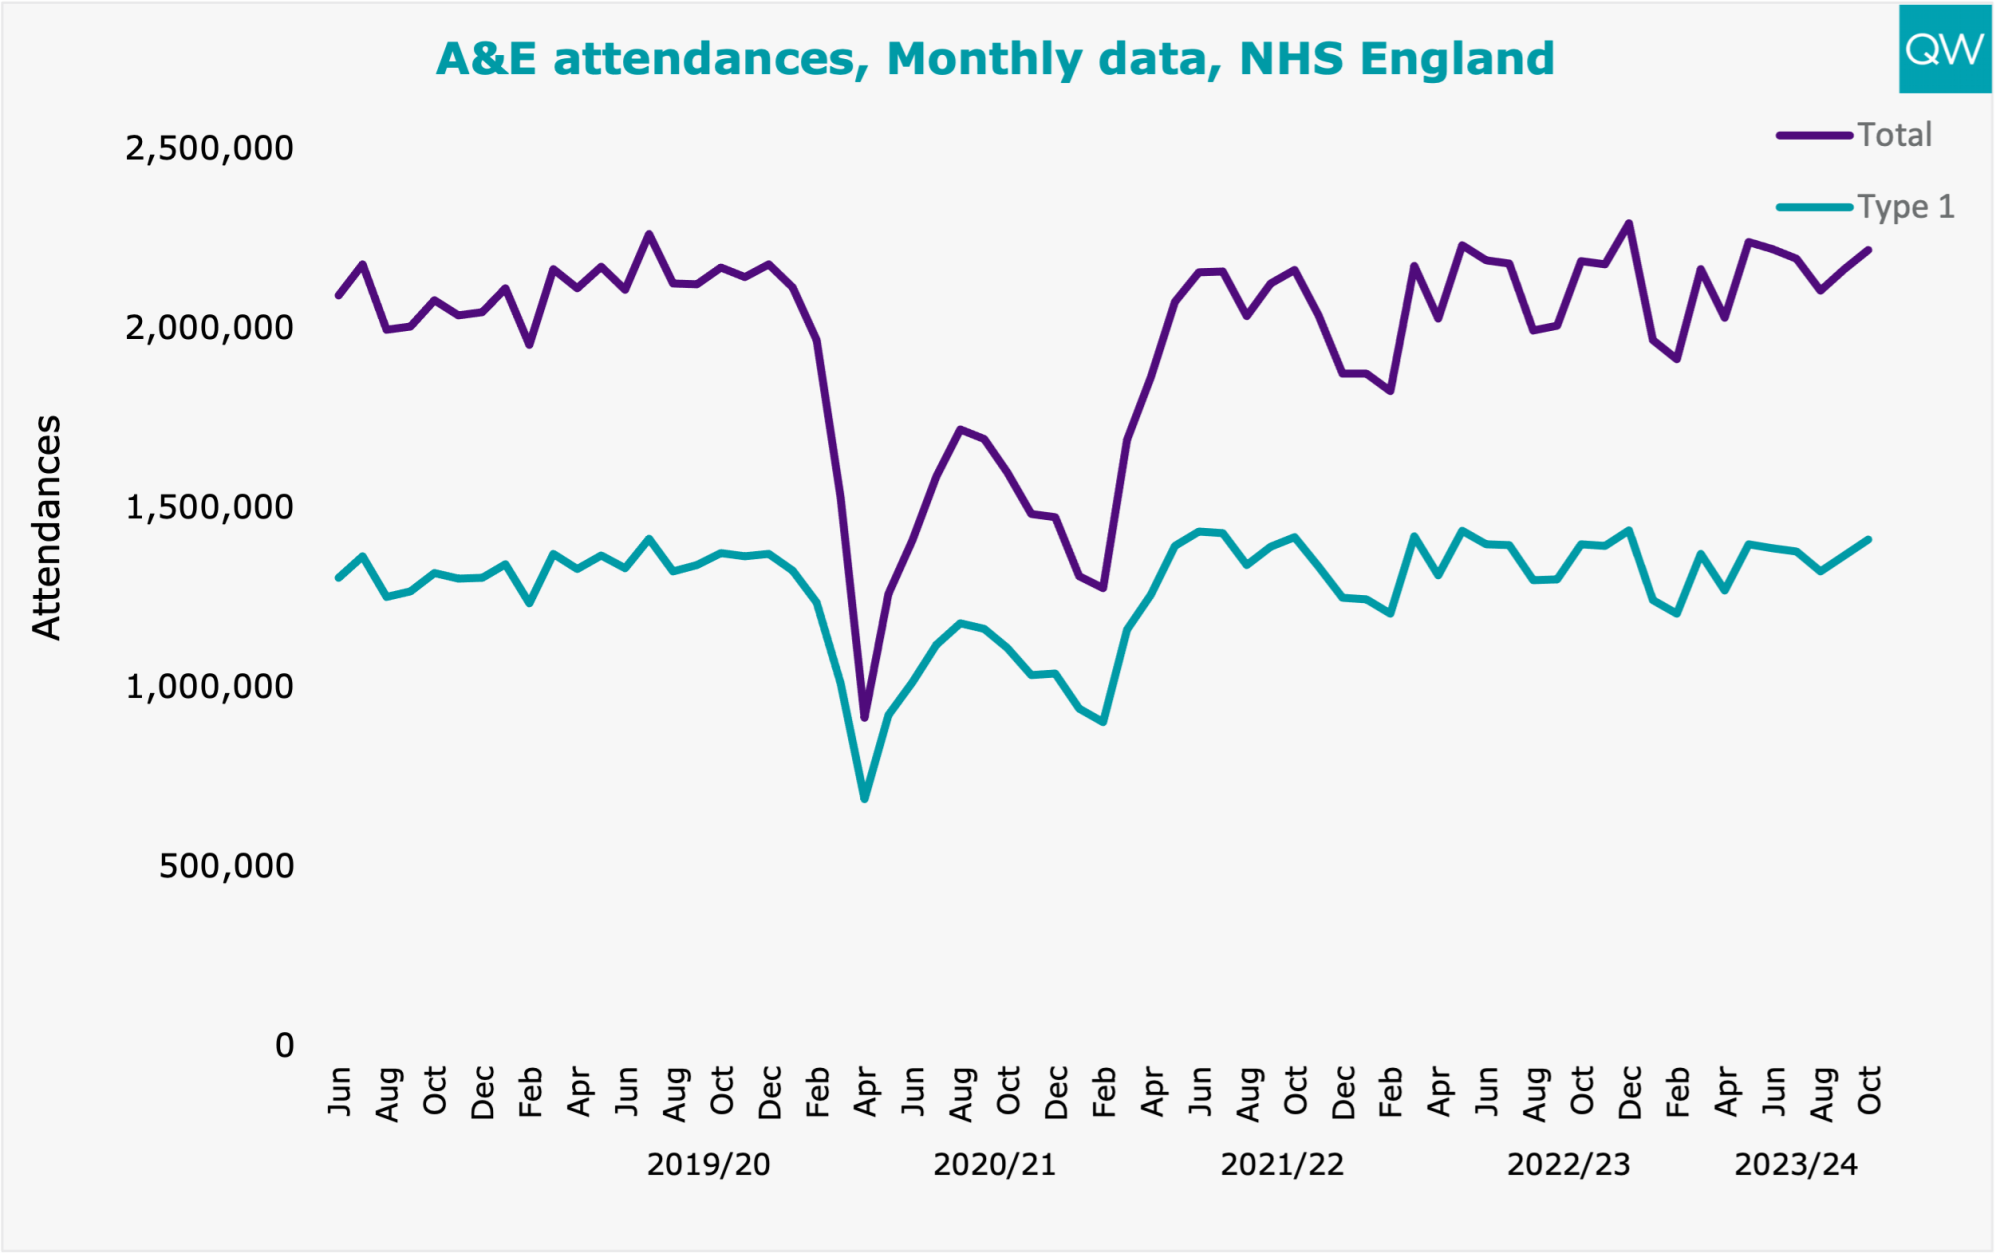 The monthly numbers of people attending A&E remain very high 